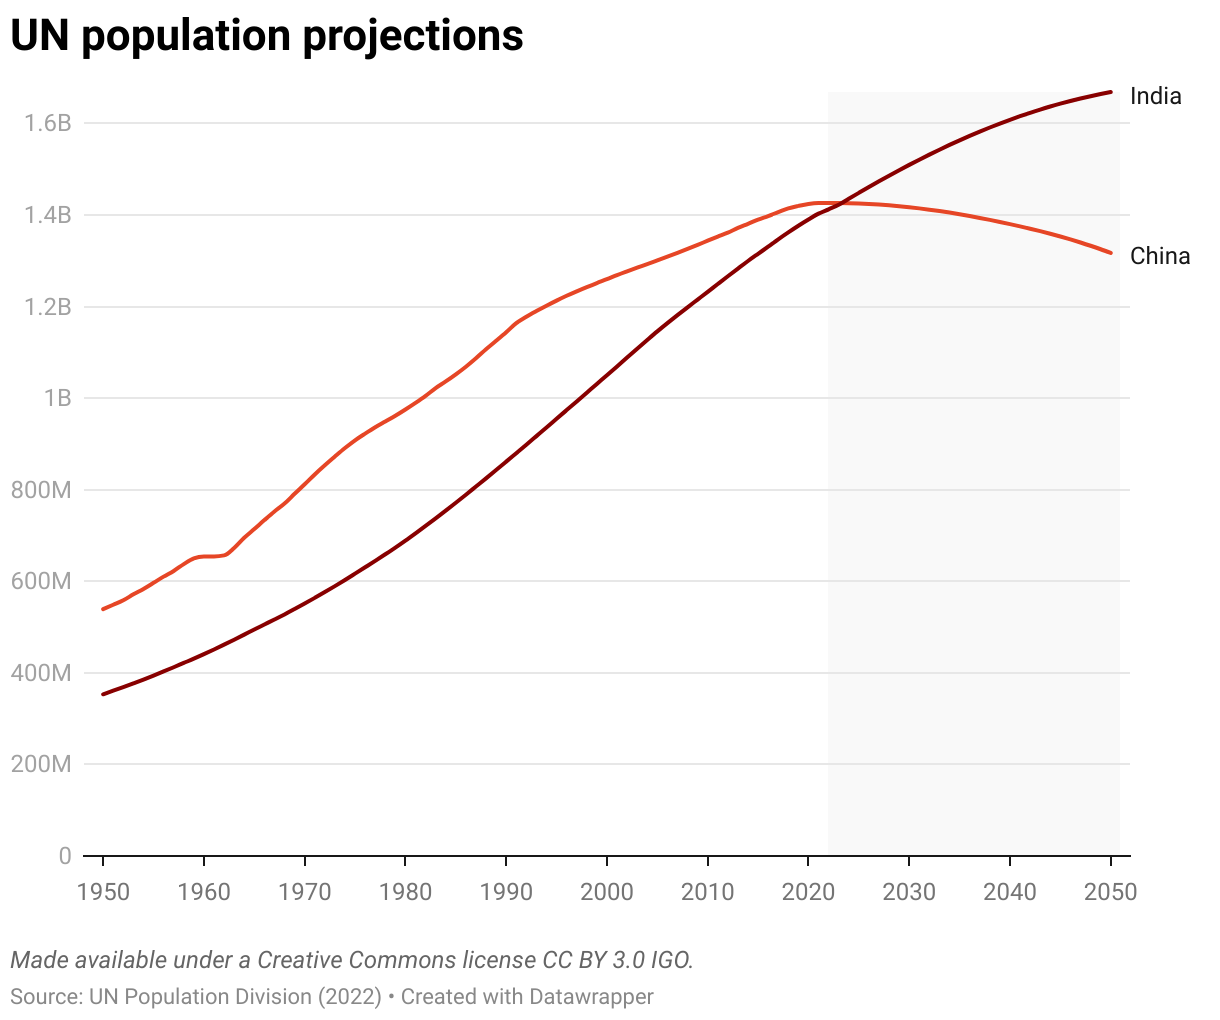 UN population projections for China and India.